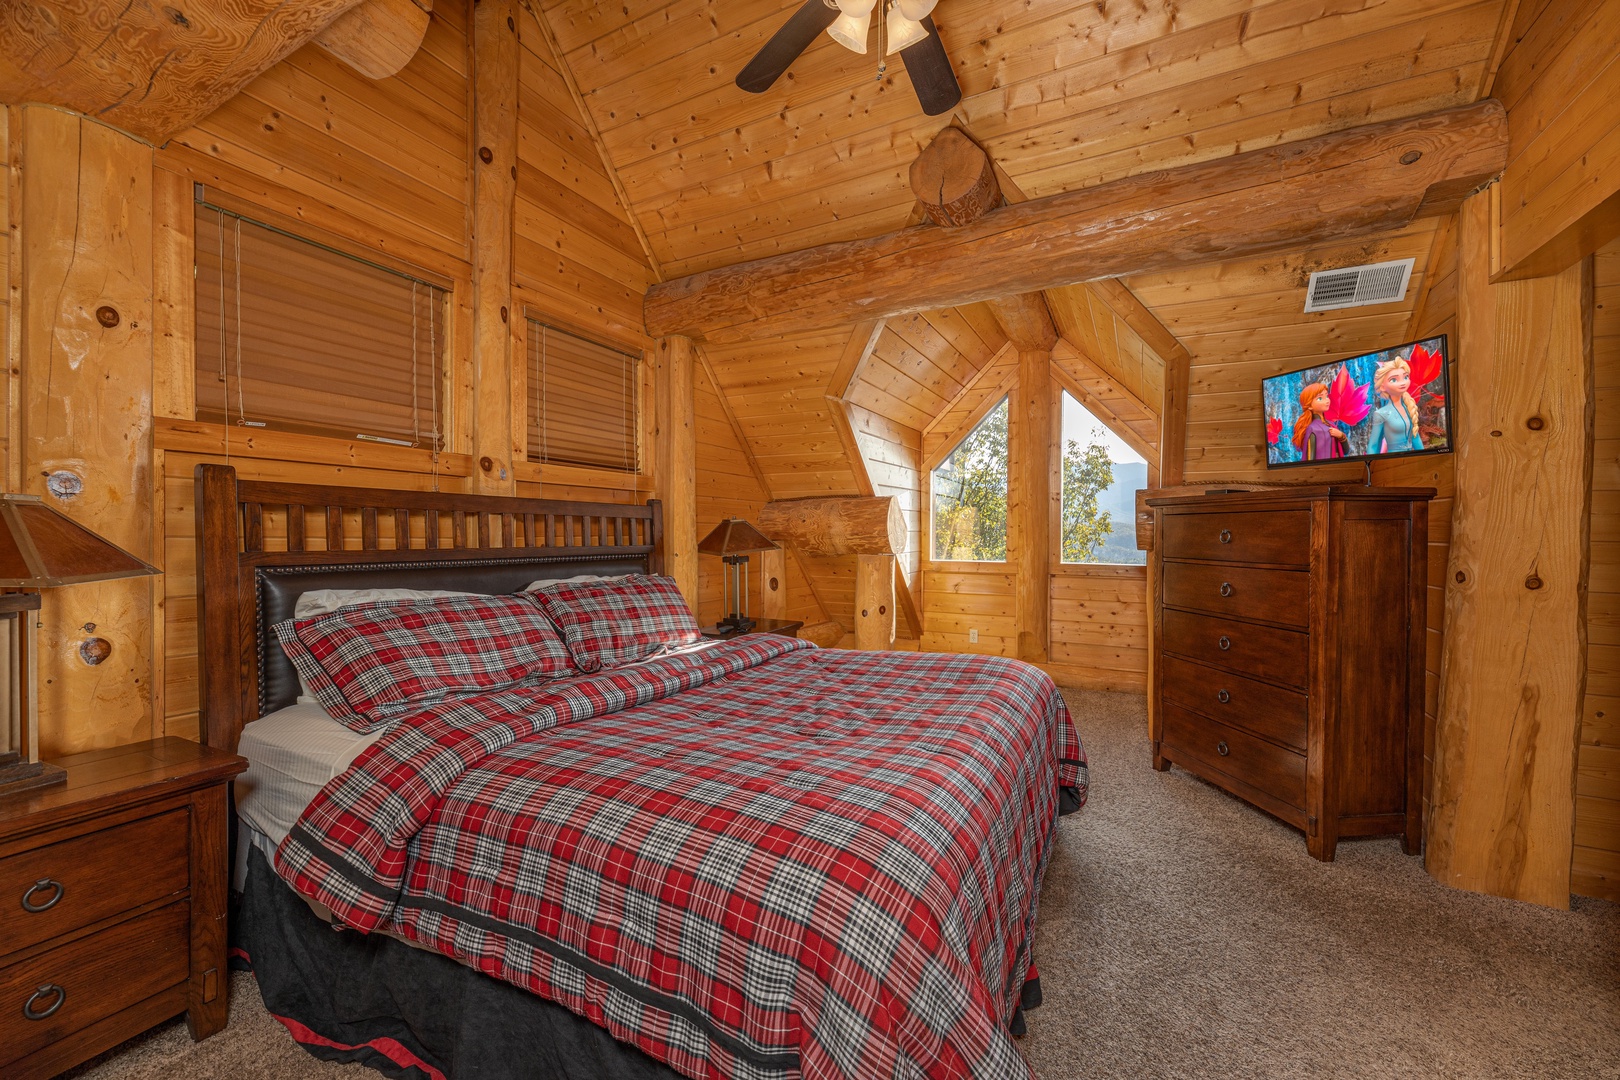 King bed, night stands, dresser, and TV in a bedroom at Grizzly's Den, a 5 bedroom cabin rental located in Gatlinburg